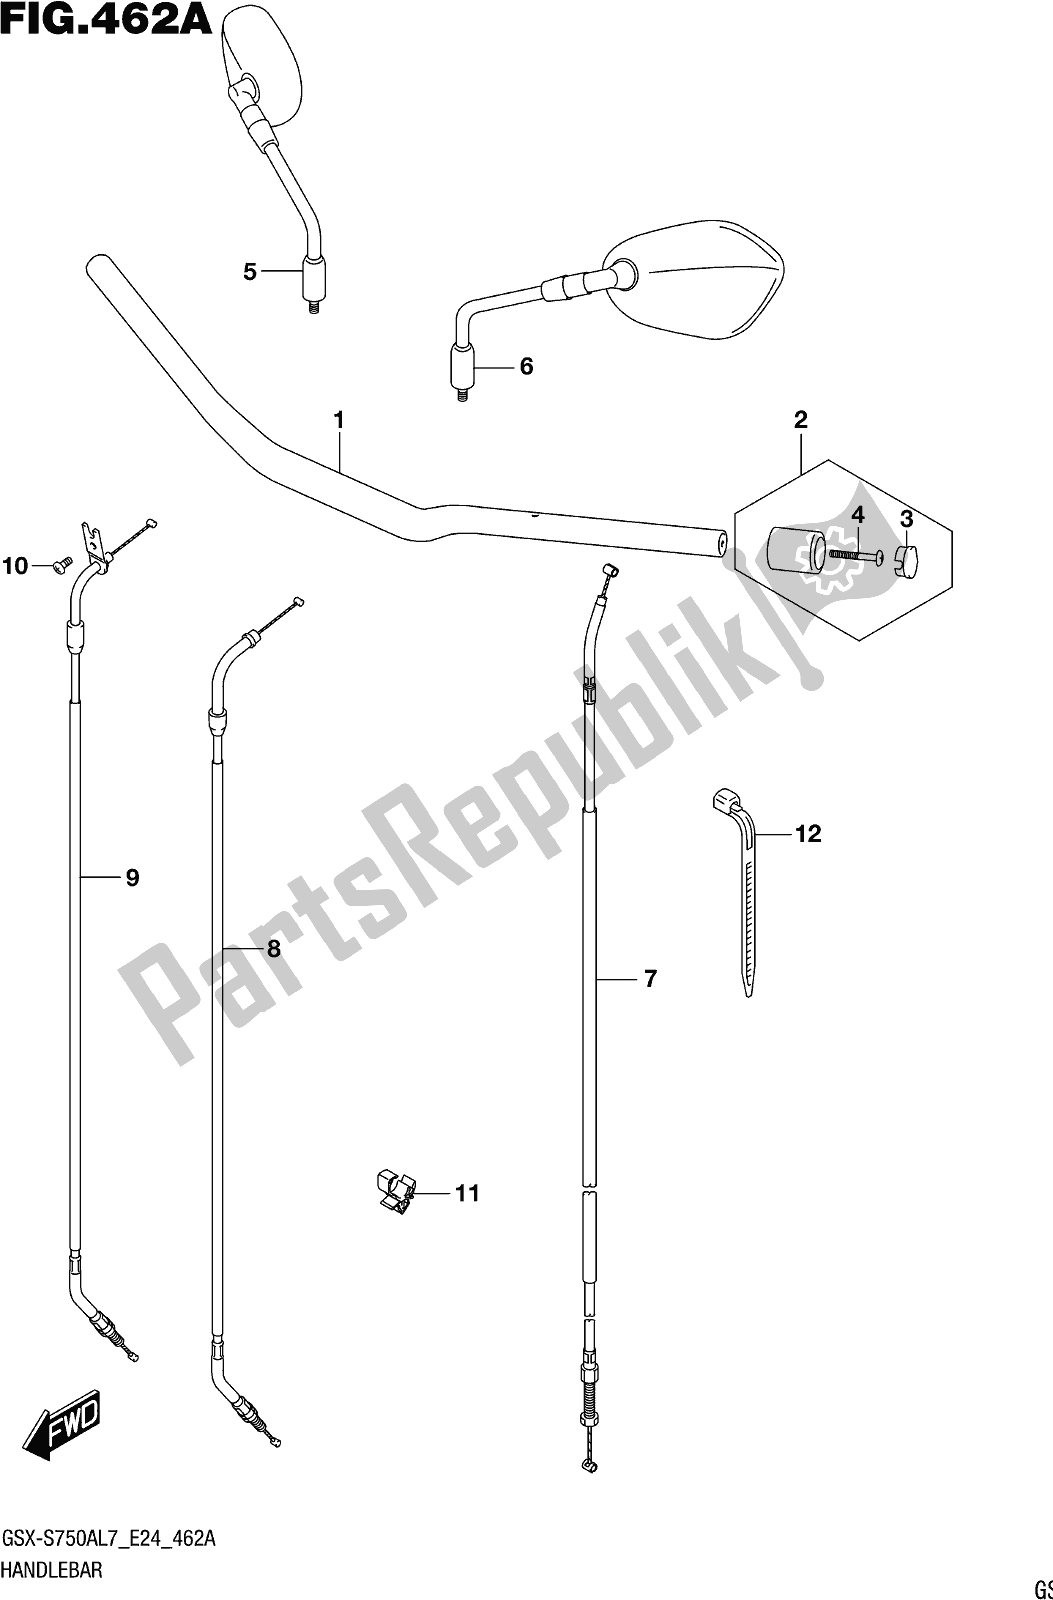 All parts for the Fig. 462a Handlebar of the Suzuki Gsx-s 750 AZ 2017